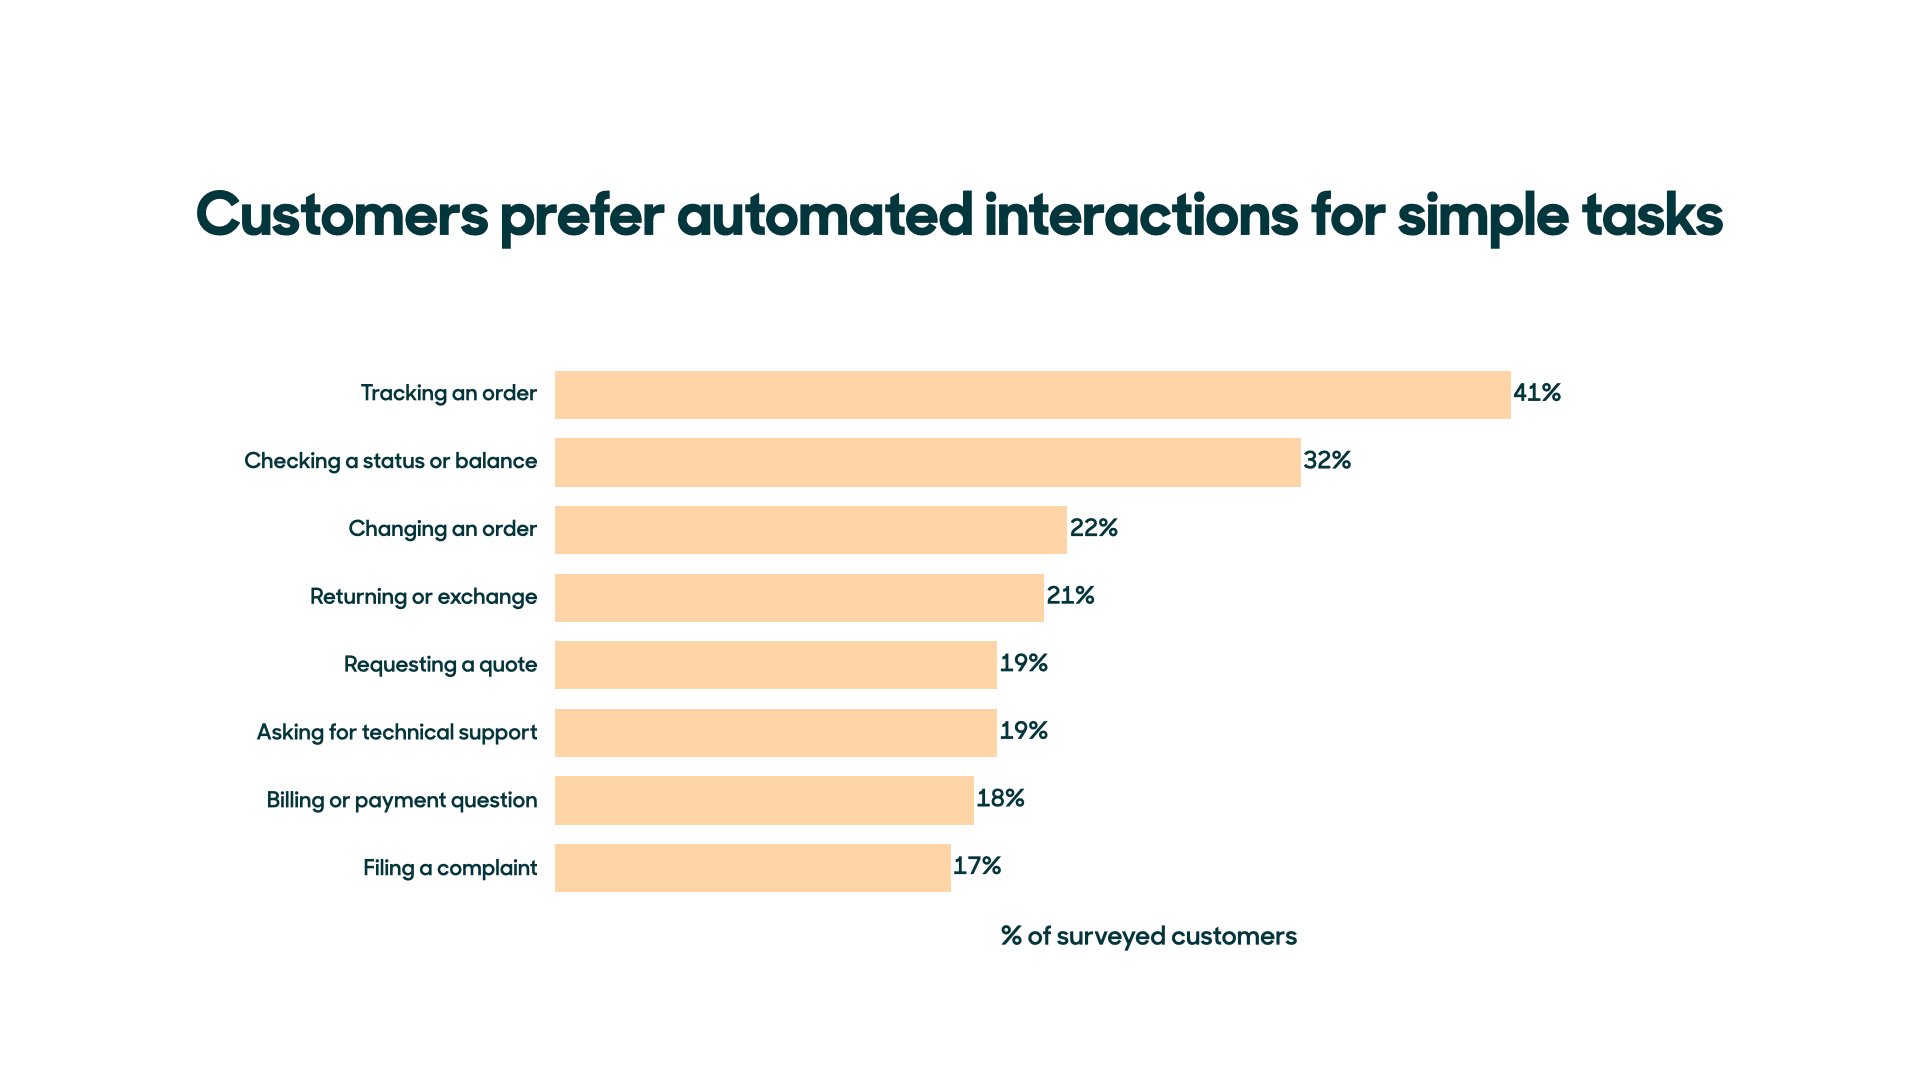 graph displaying the different types of tasks that customers prefer to have automated